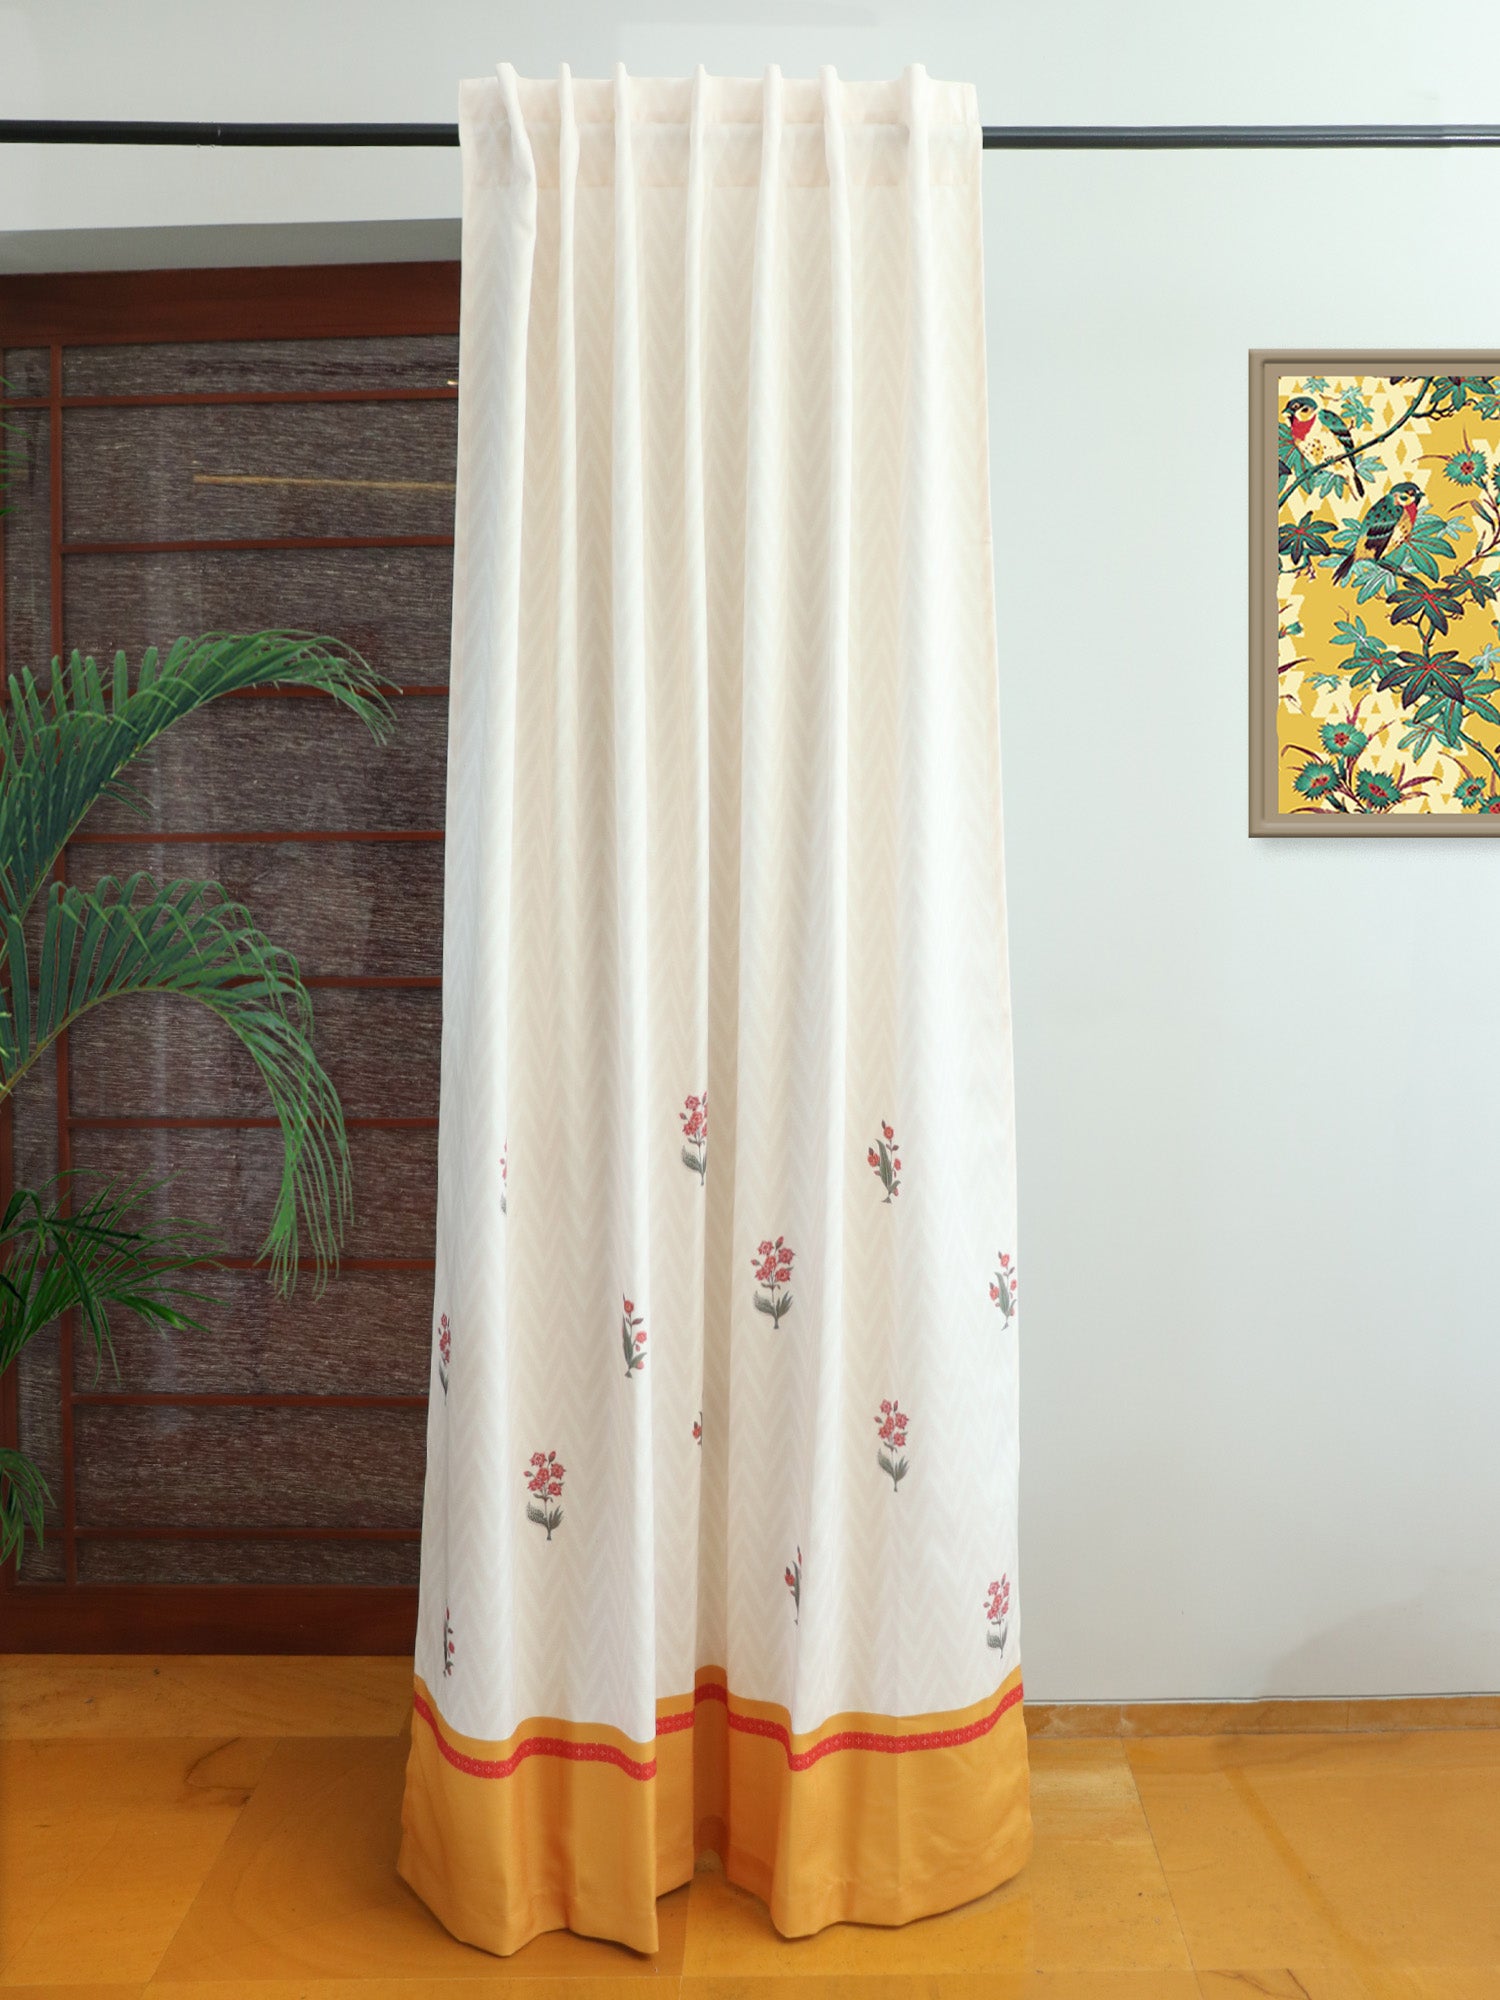 Door Curtain Floral Printed Cotton Blend (Hidden Loop) Brown Color - 50 x 84 inches